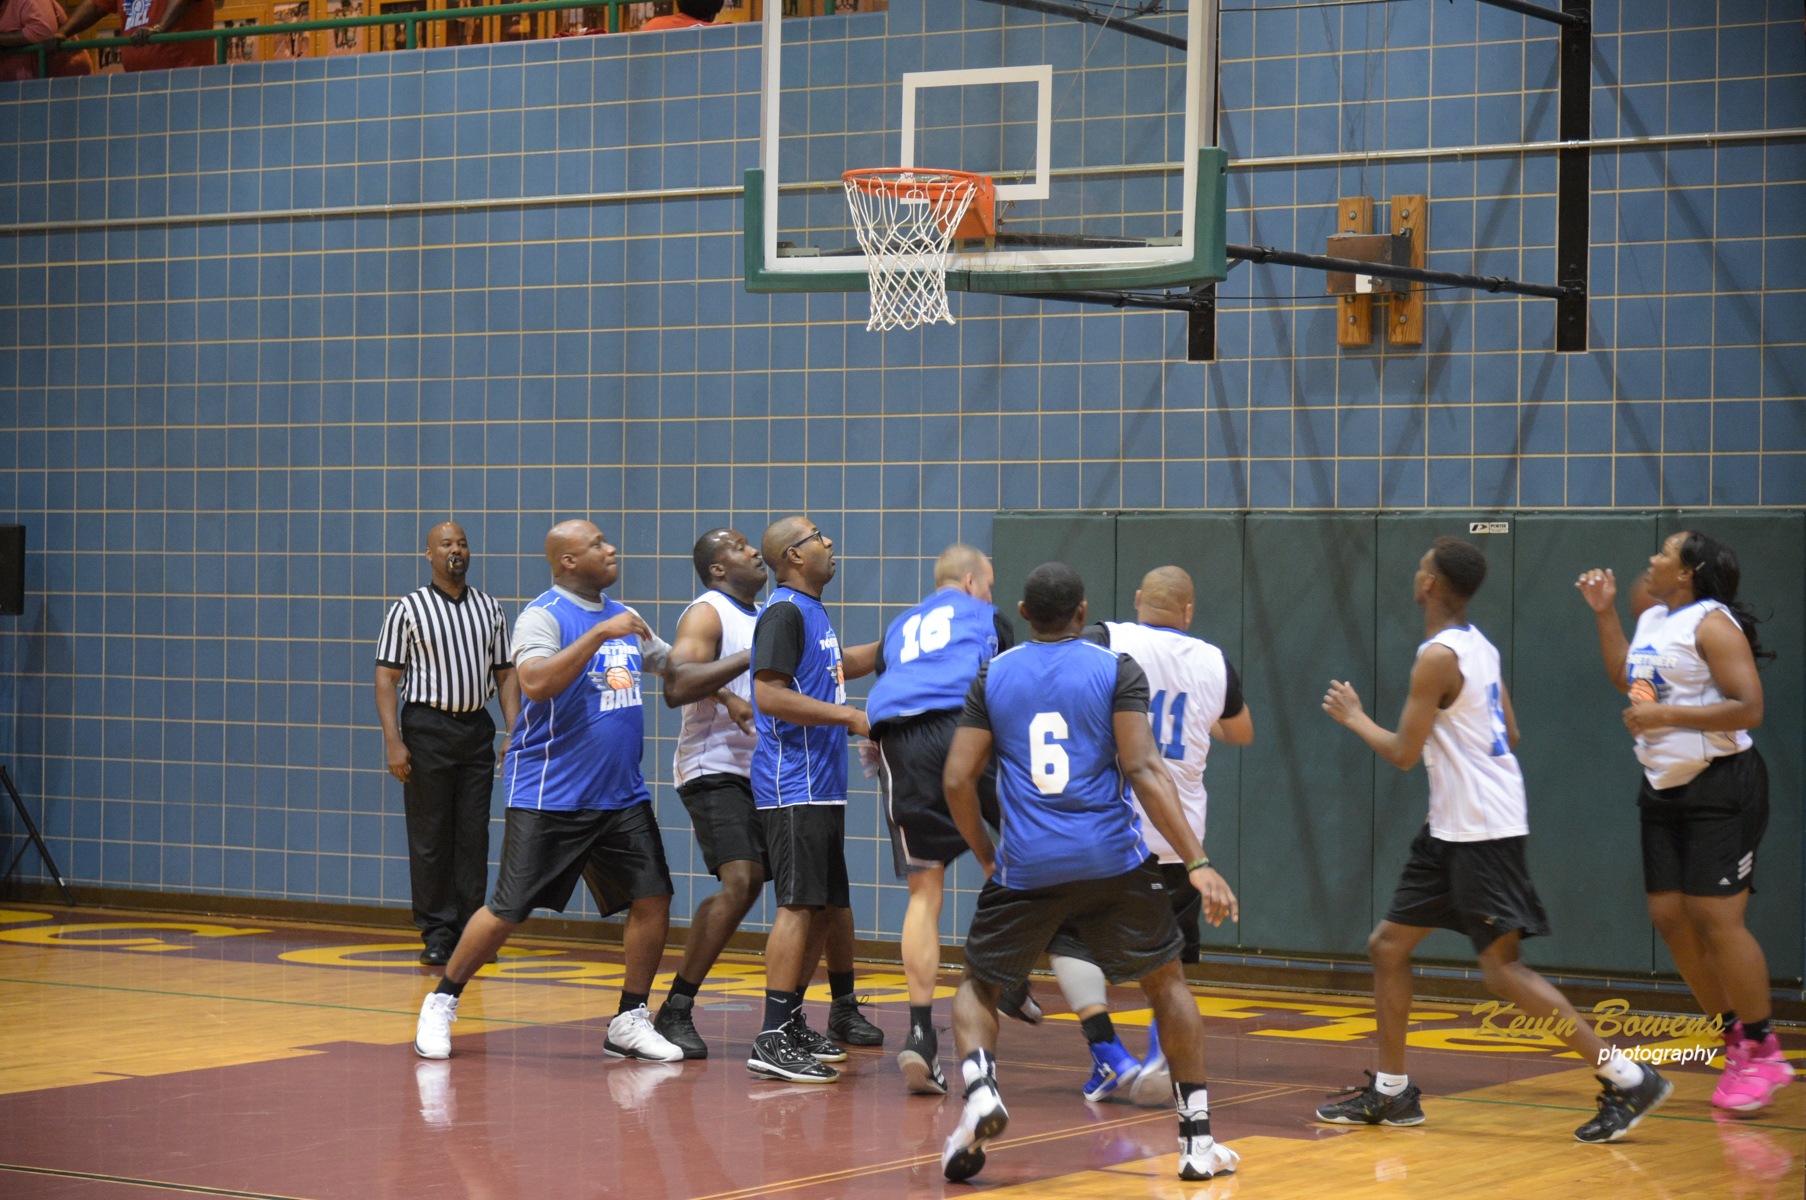 Together We Ball, Dallas Police Department, Dallas ISD Police Department, DART Police Department